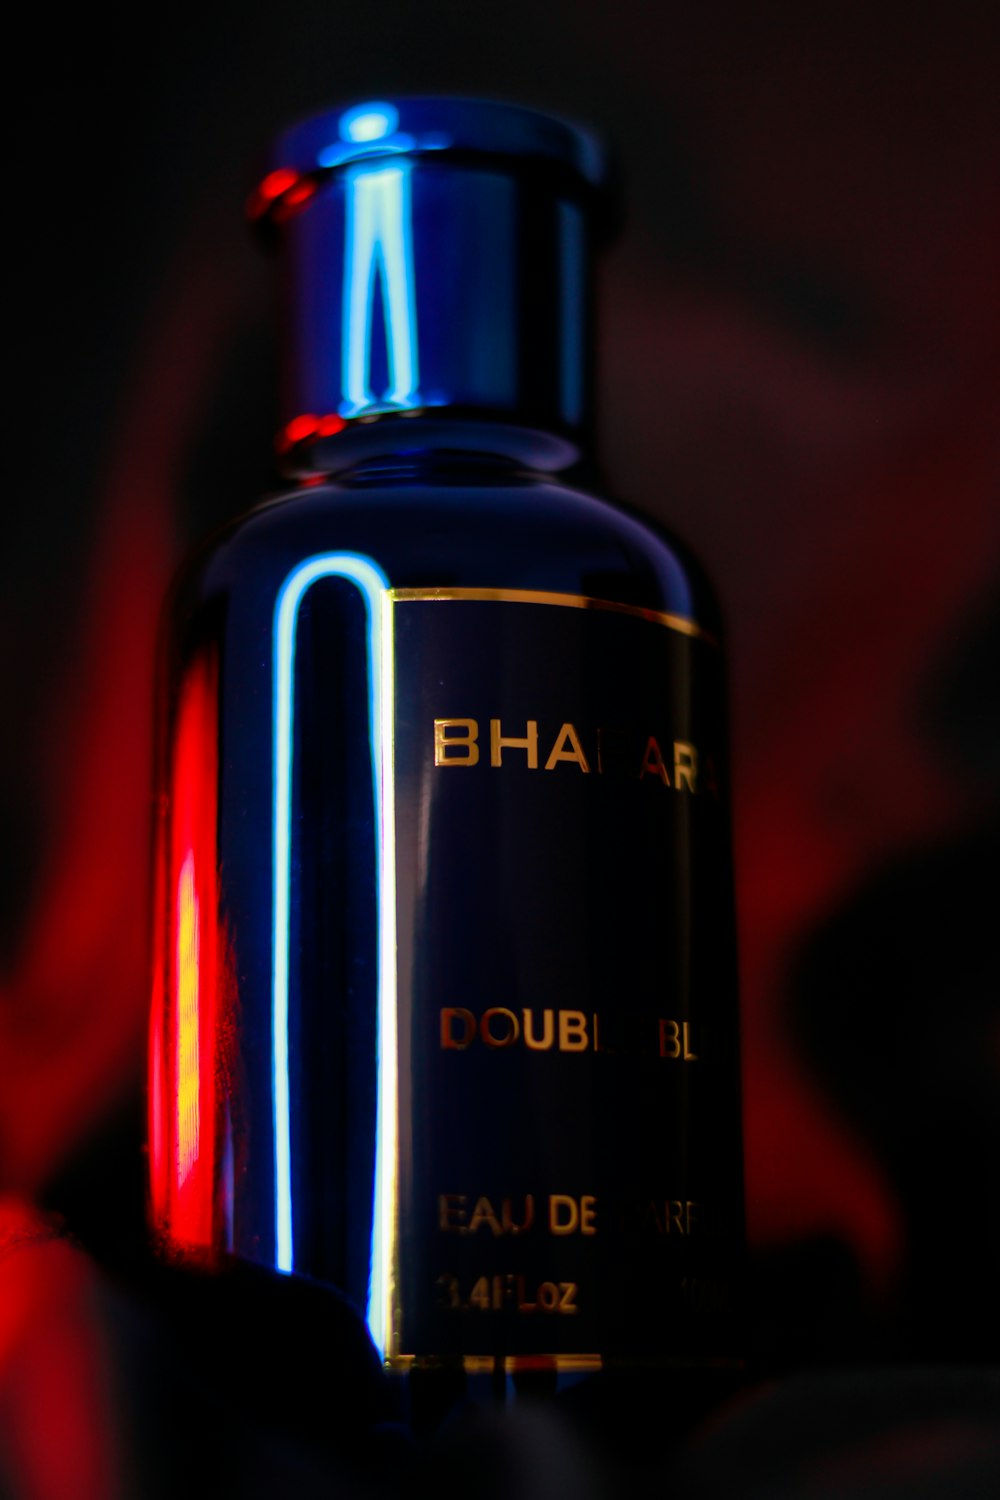 a close up of a bottle of perfume